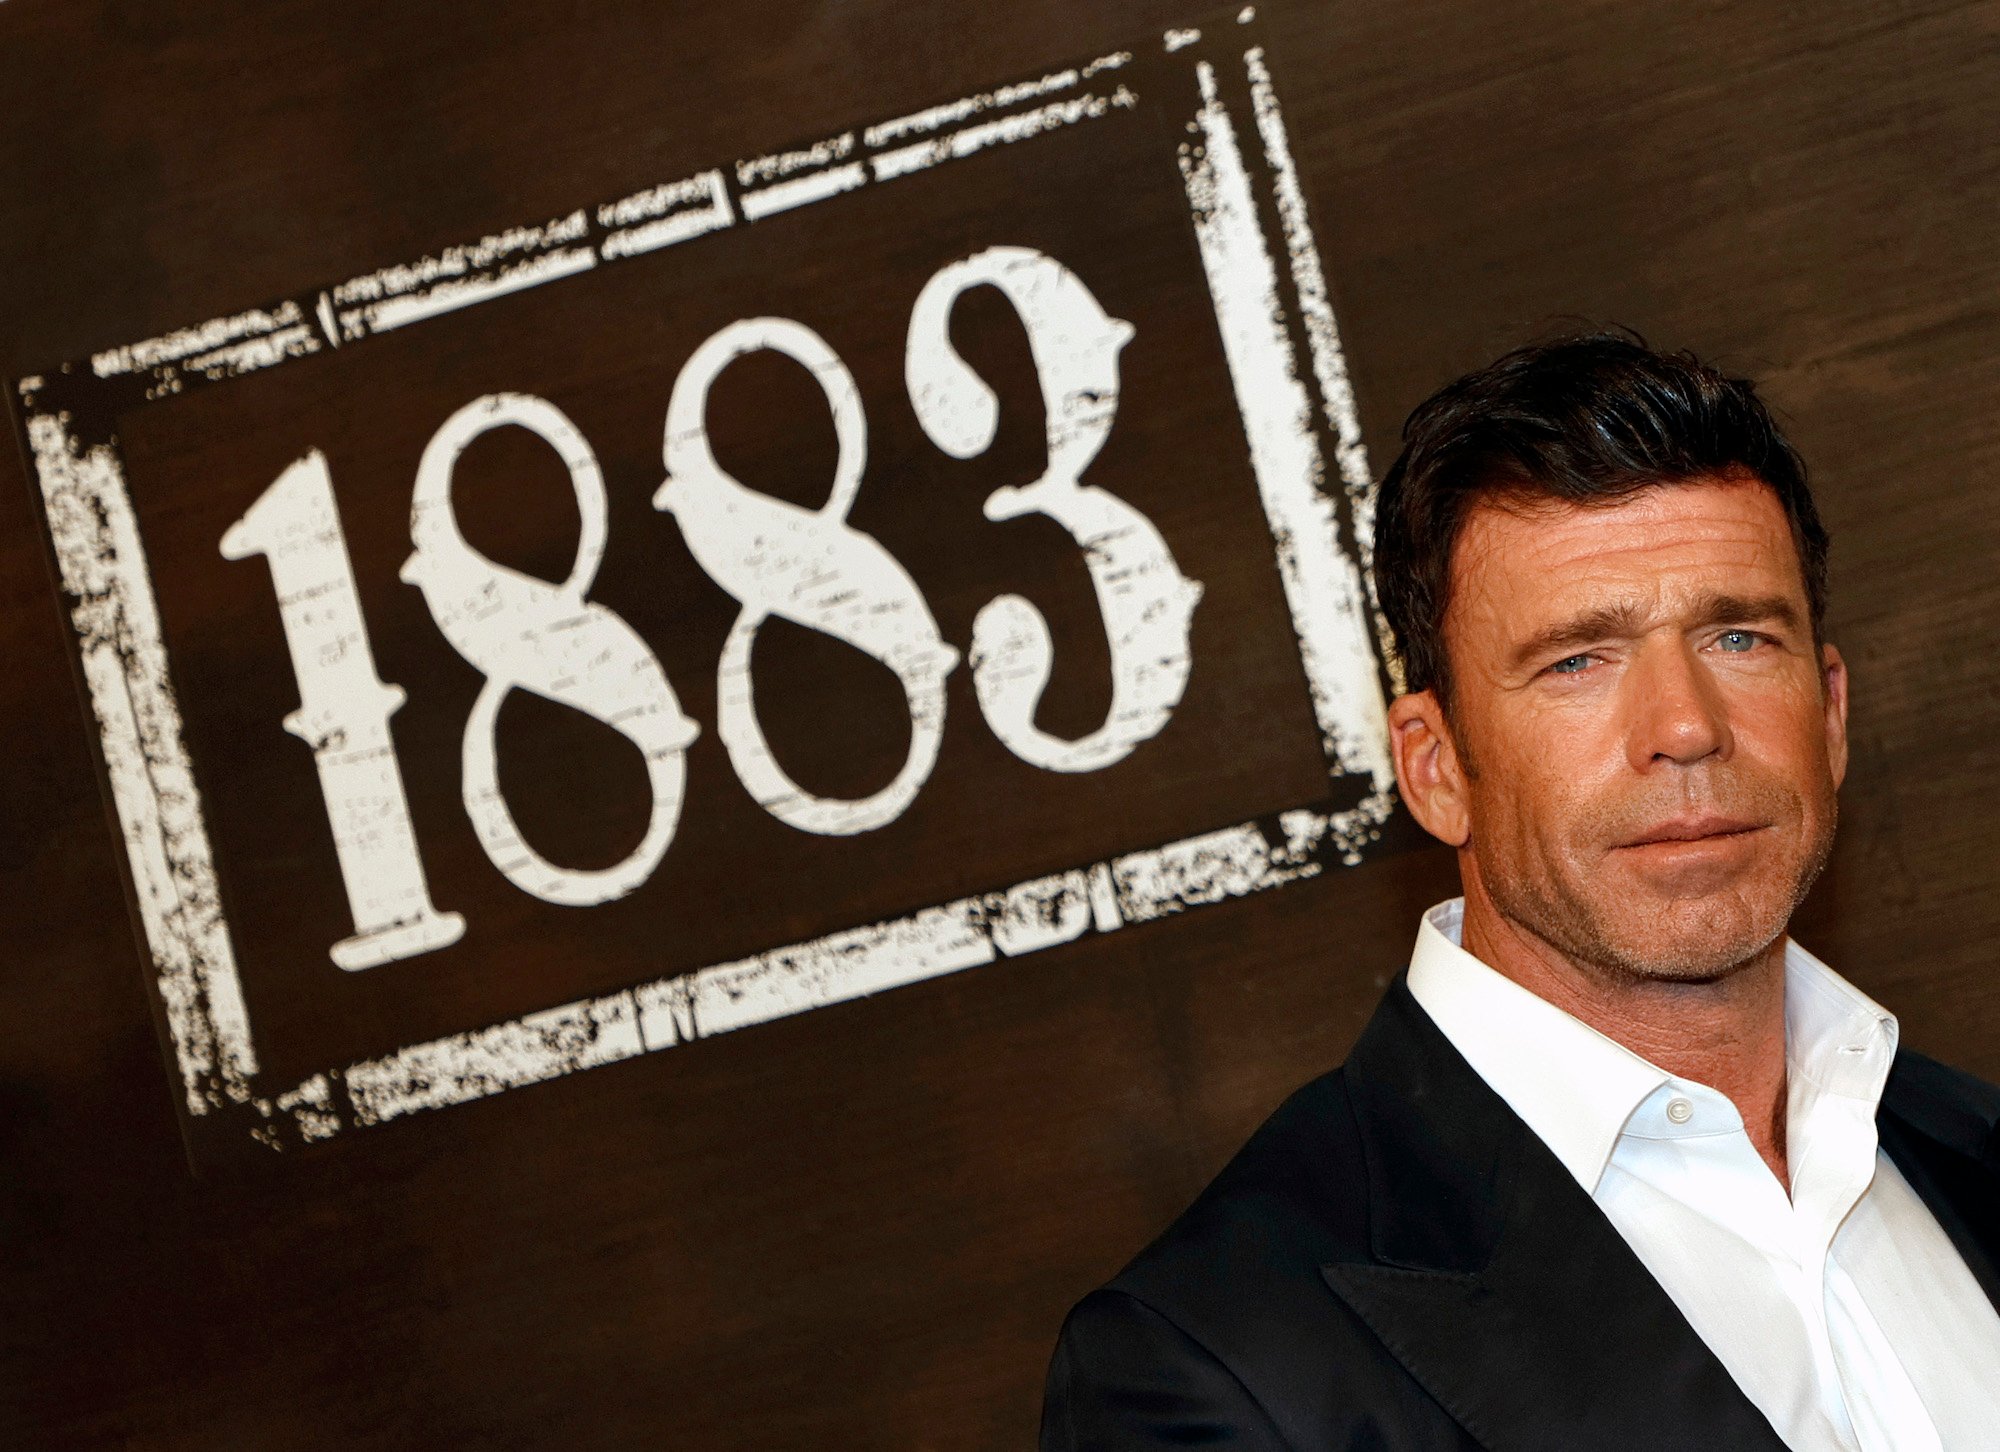 '1883' creator Taylor Sheridan smiles at the premiere of the show he wrote